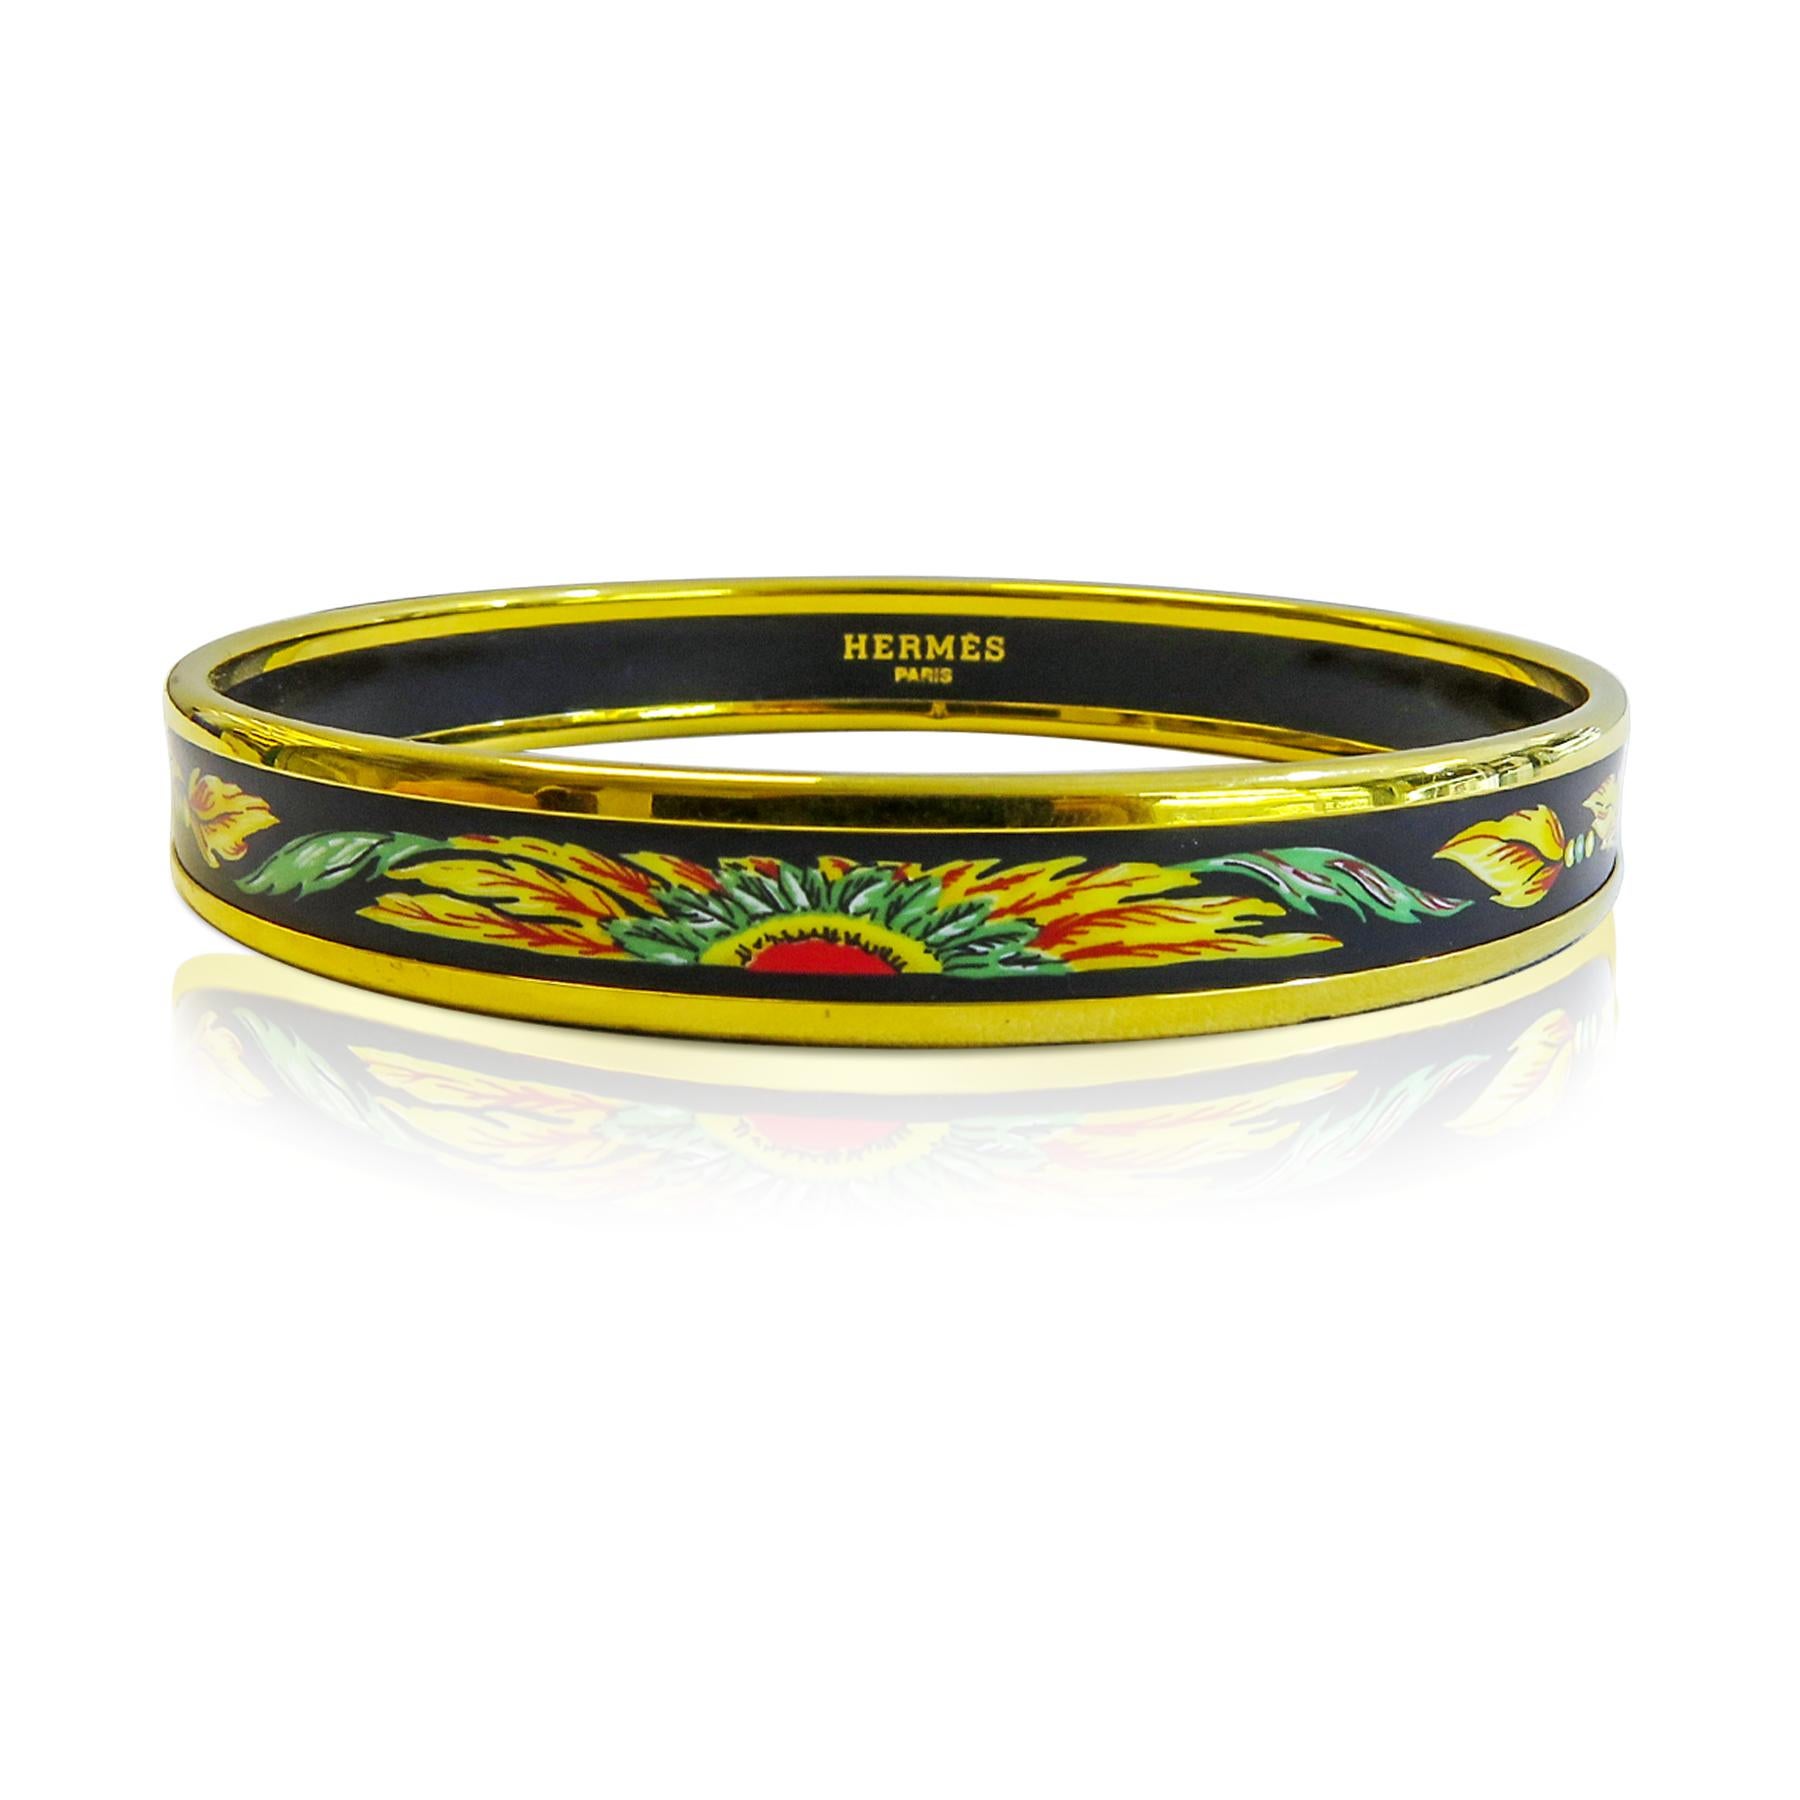 This Hermes bangle features an 18 Karat gold plated with a printed enamel. Carved in Austria, It weighs 22.9 grams, 10mm wide and has an inner diameter of 2.7 inches to give a comfortable fit in your wrist.

Condition: Excellent ( There is small